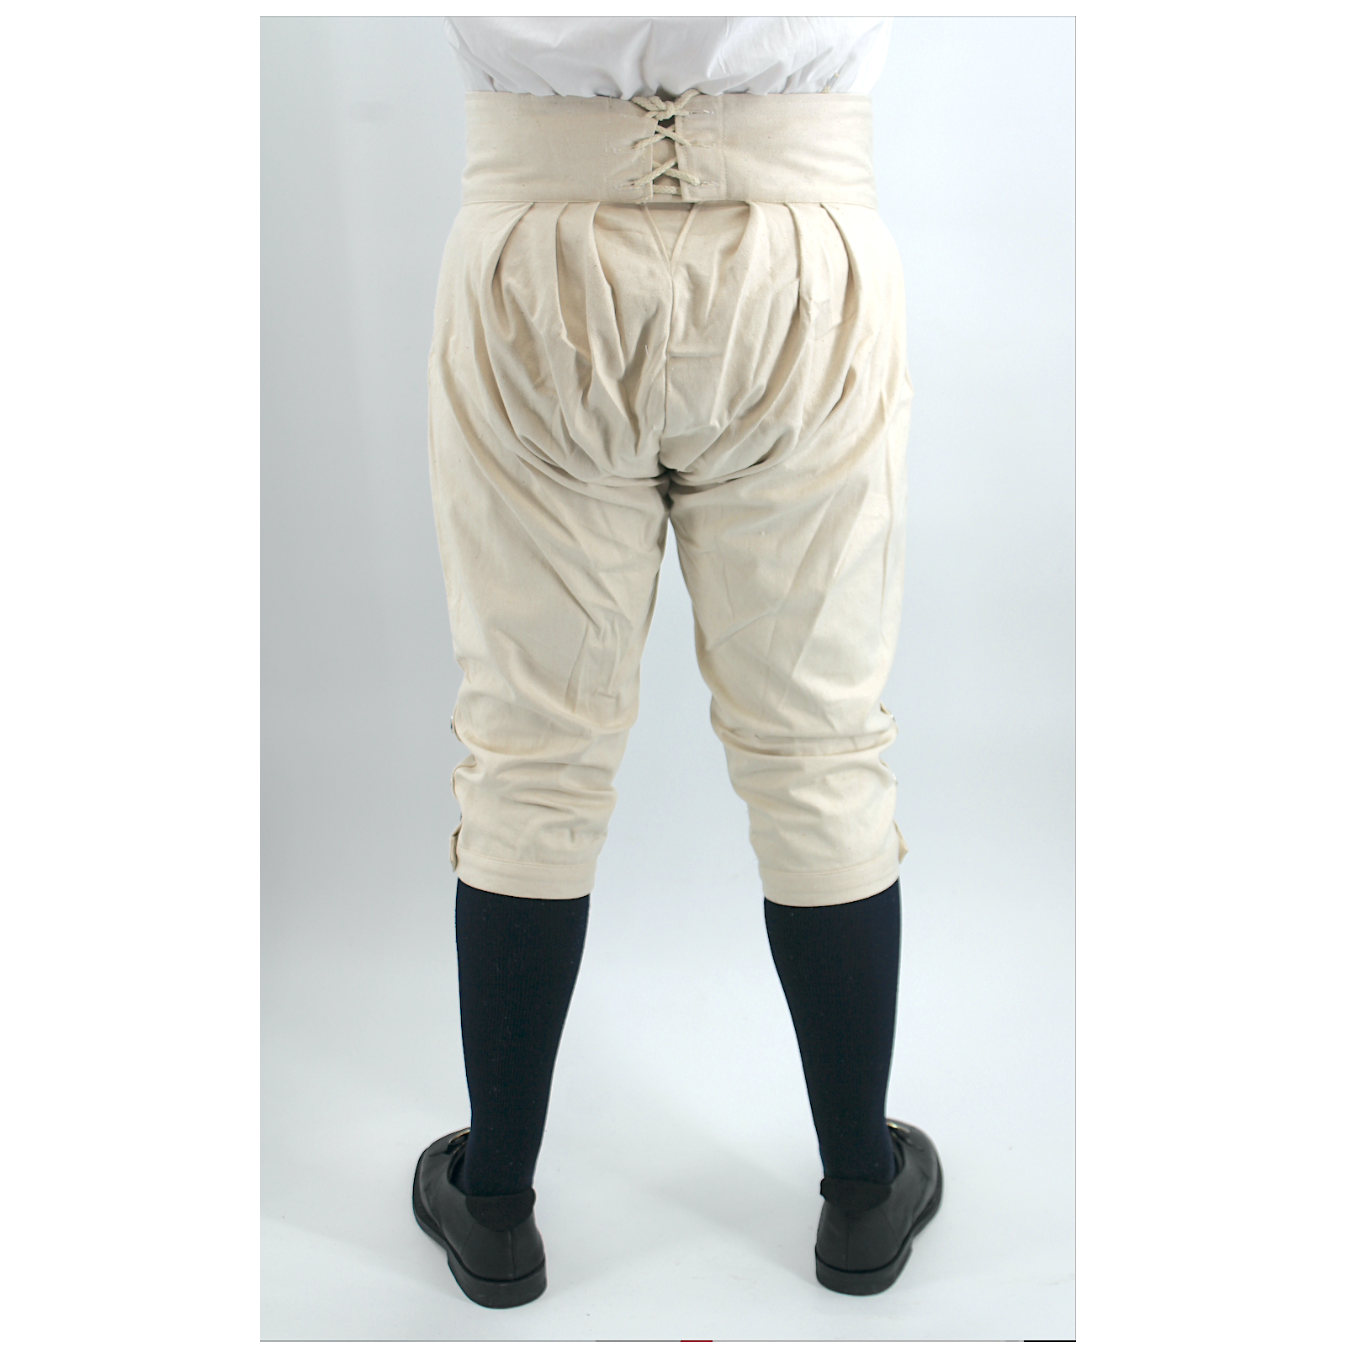 Colonial Elegance Revived: Osnaburg Colonial Knee Breeches - Ideal for Revolutionary War and Colonial Enthusiasts